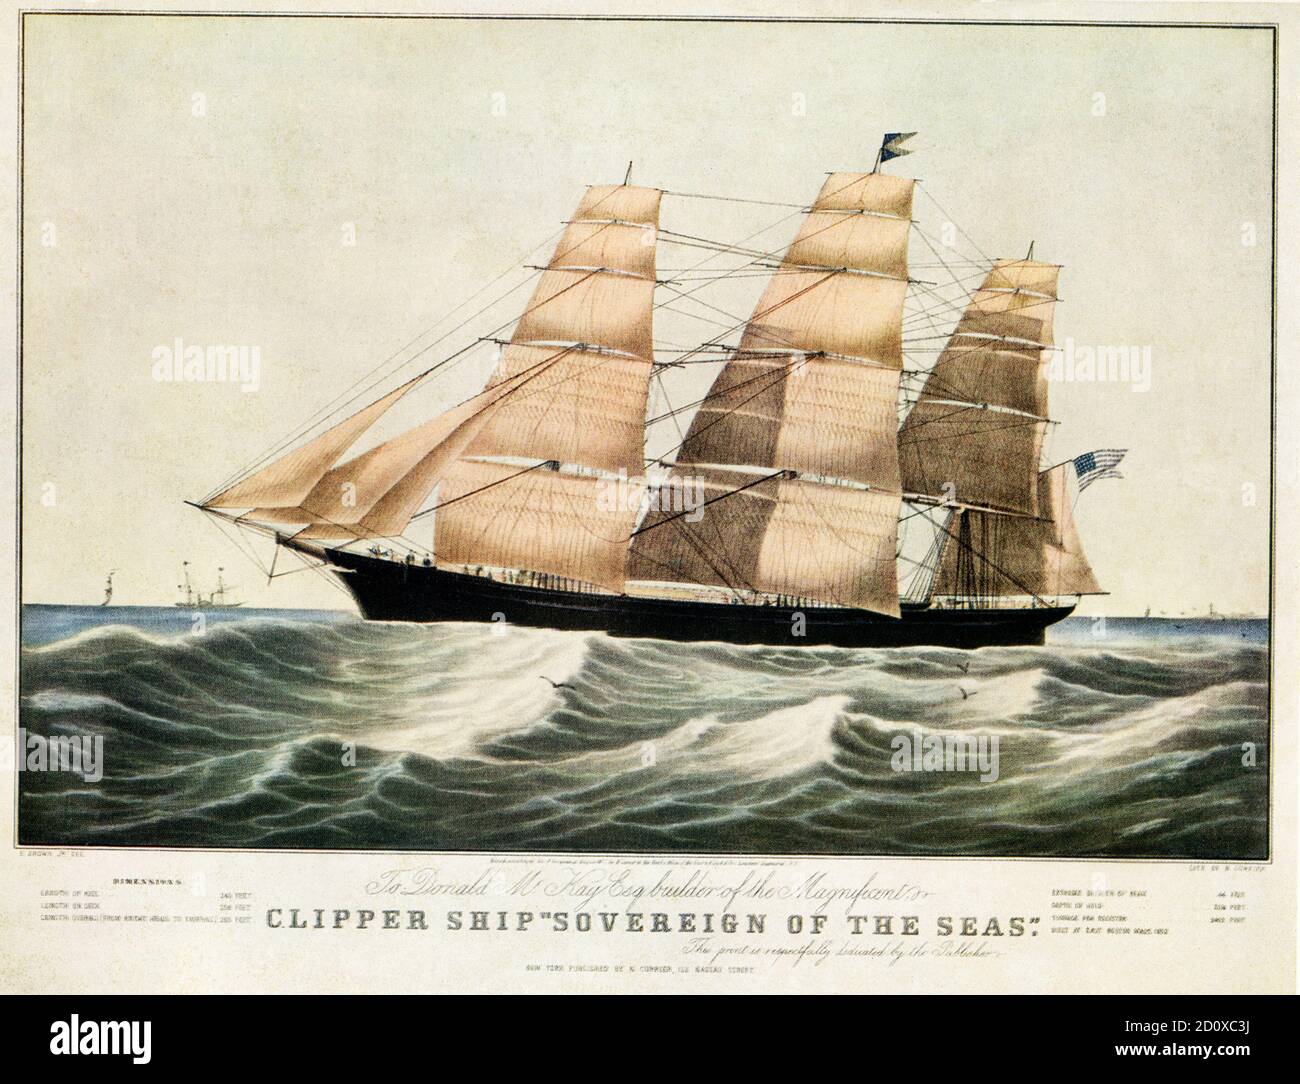 Clipper Ship 'Sovereign of the Seas' E Brown Jr del N Currier 1852.  Sovereign of the Seas, a clipper ship built in 1852, was a sailing vessel  notable for setting the world